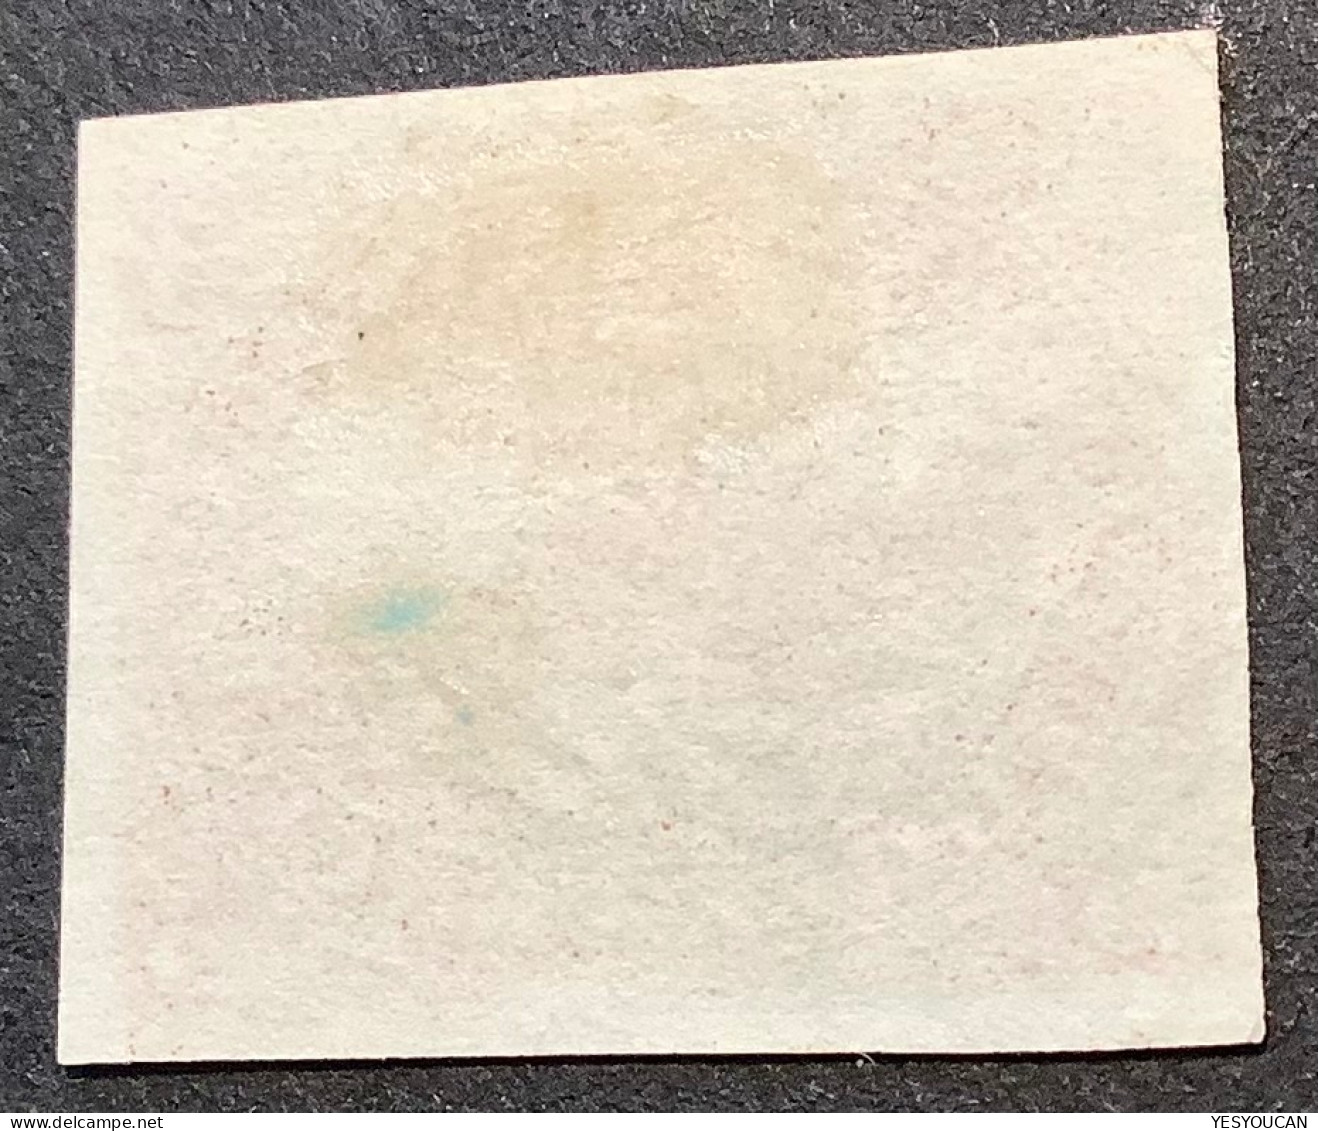 Sc.4ii XF Used 1852-57 3d Orange Red Beaver, Wove Paper, Attractive Blue Pmk  (Canada Y&T5 SUP Obl Castor/Queen Victoria - Used Stamps